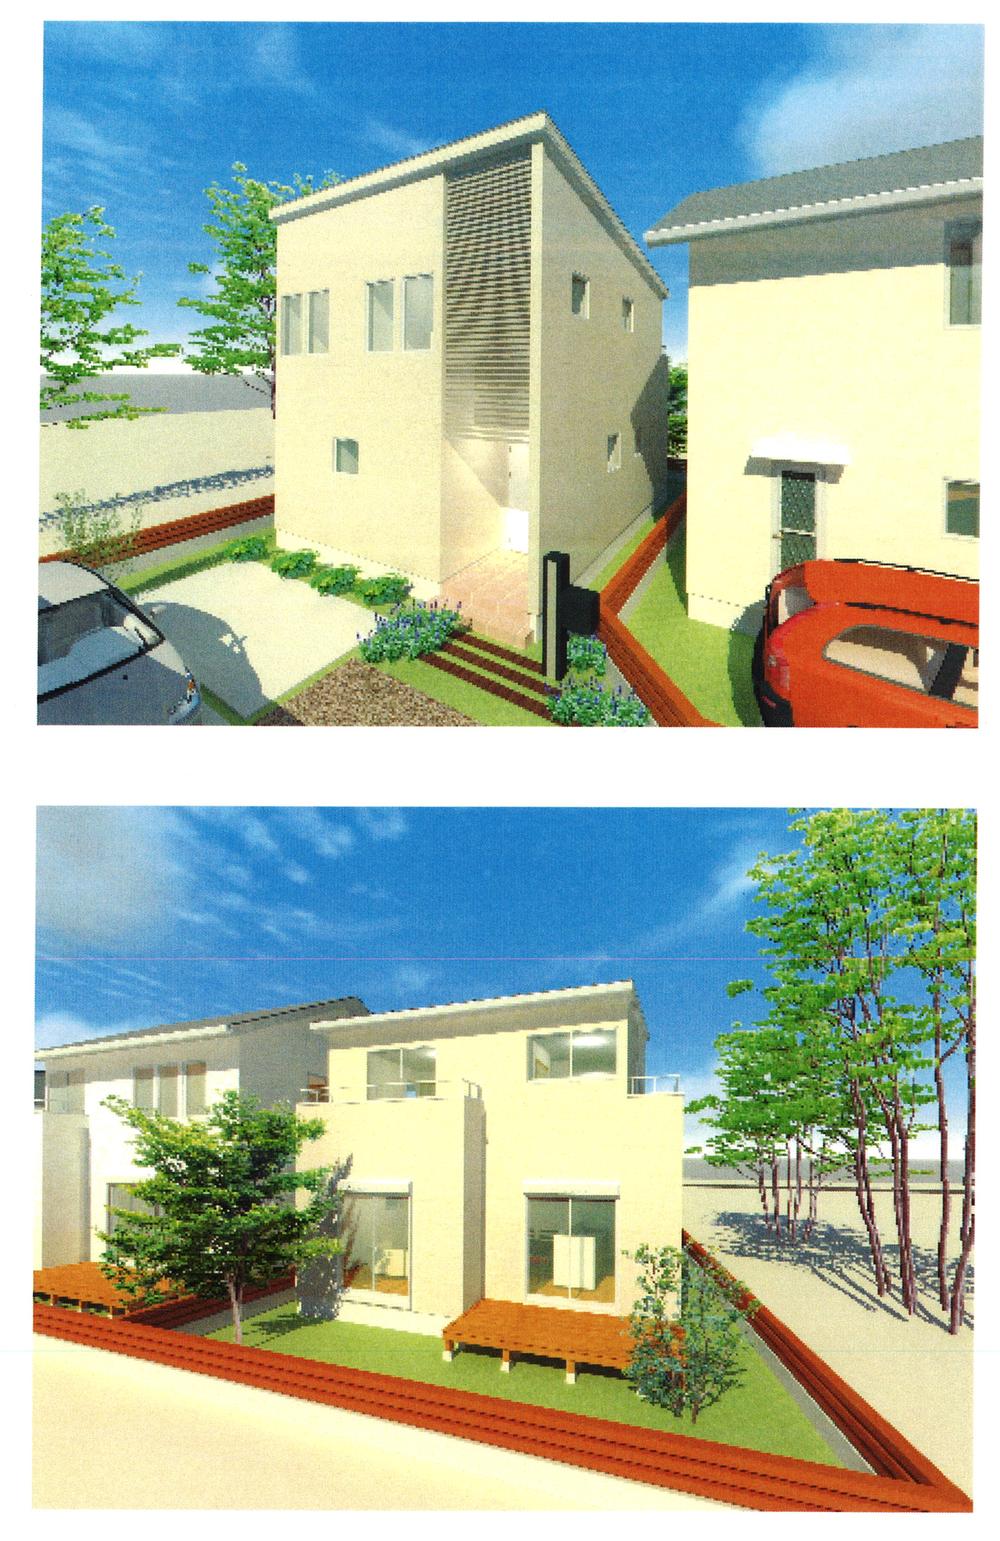 Building plan example (Perth ・ appearance). Building plan example appearance